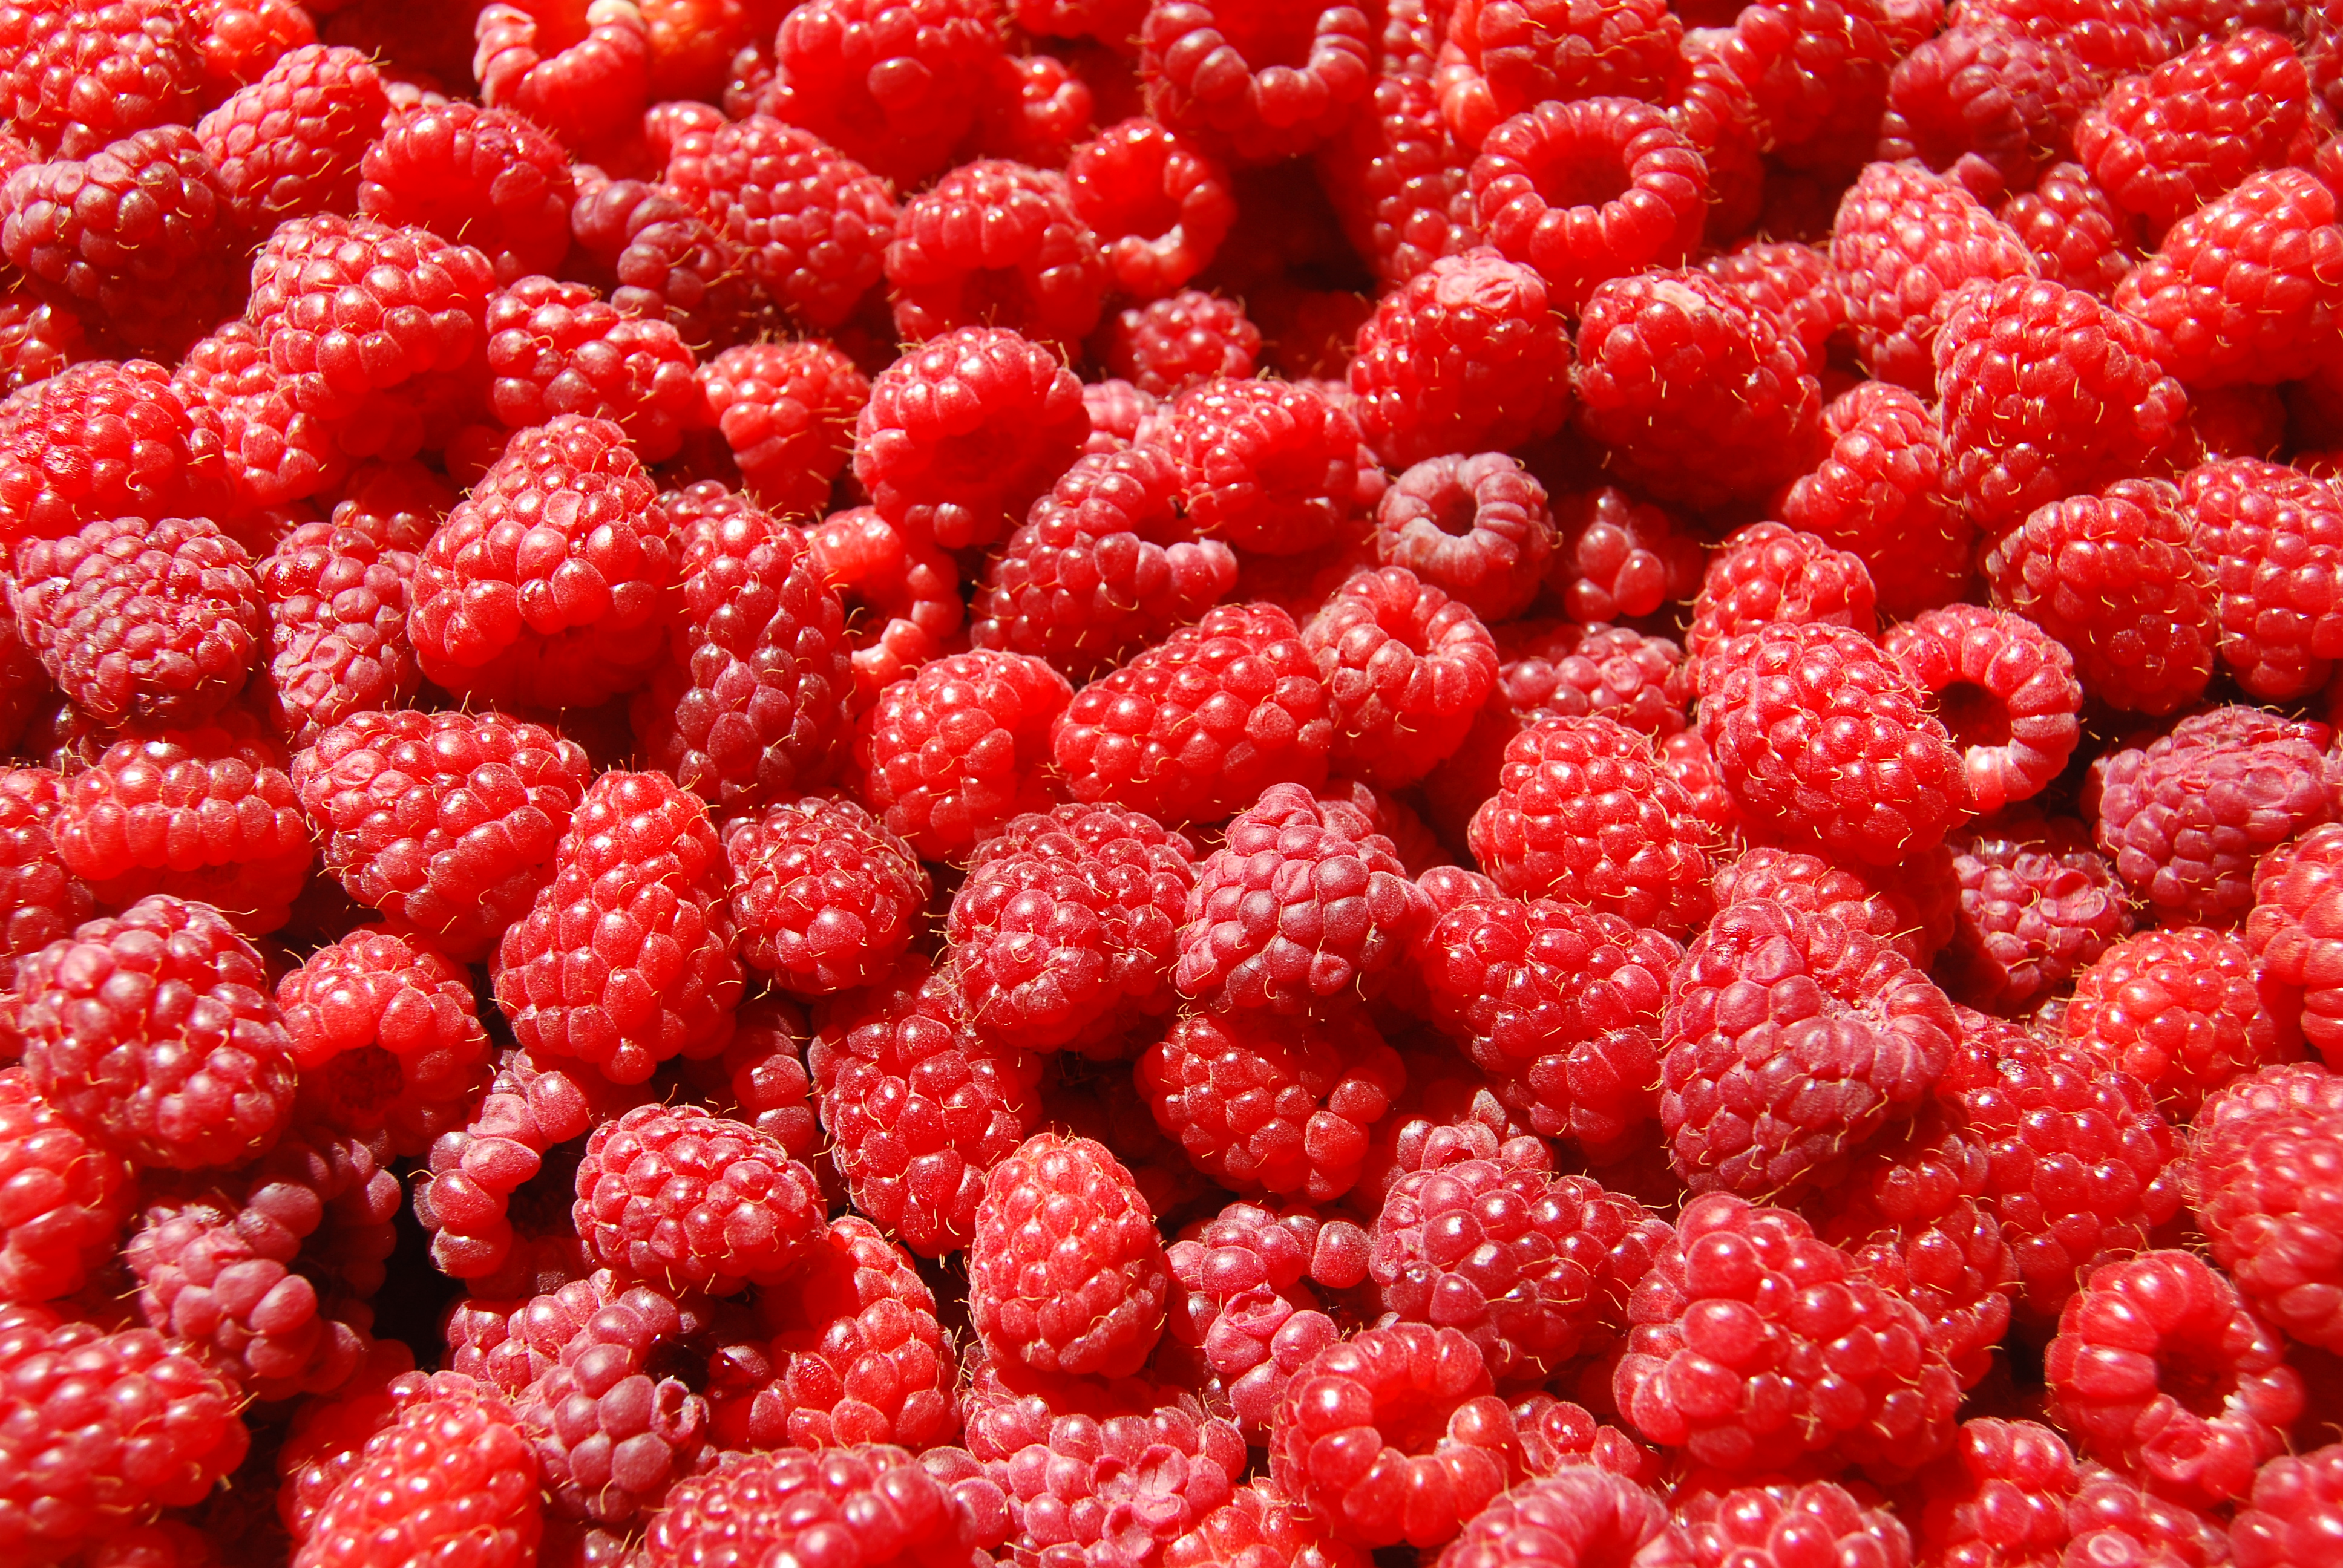 Raspberries images Raspberries ♡ HD wallpaper and background photos ...